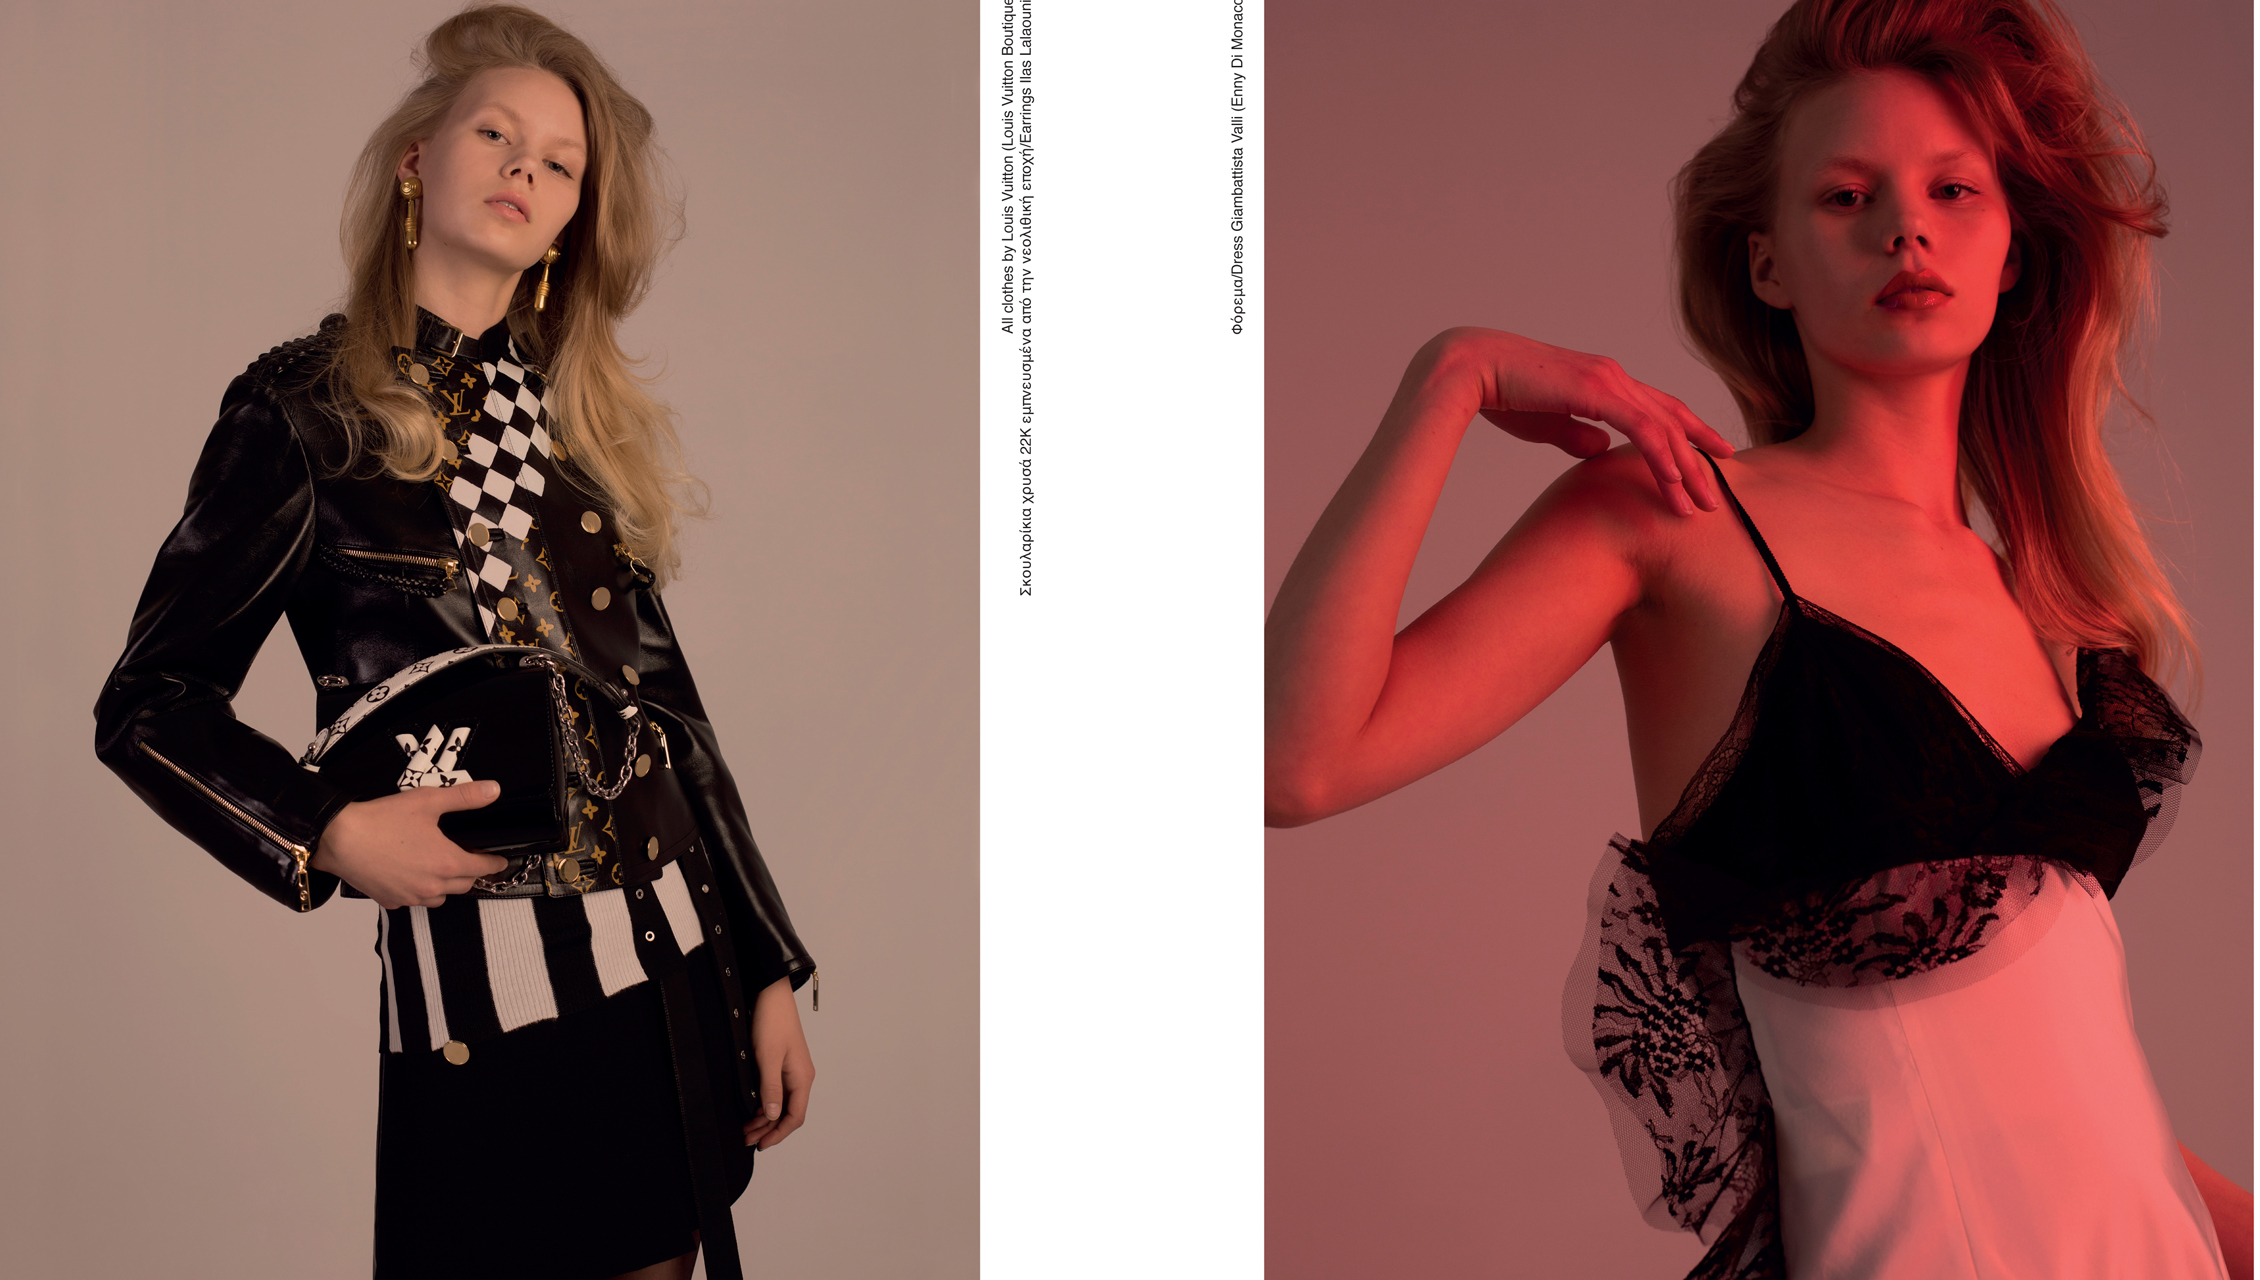 Rebekka for your eyes only @Ozon Mag.